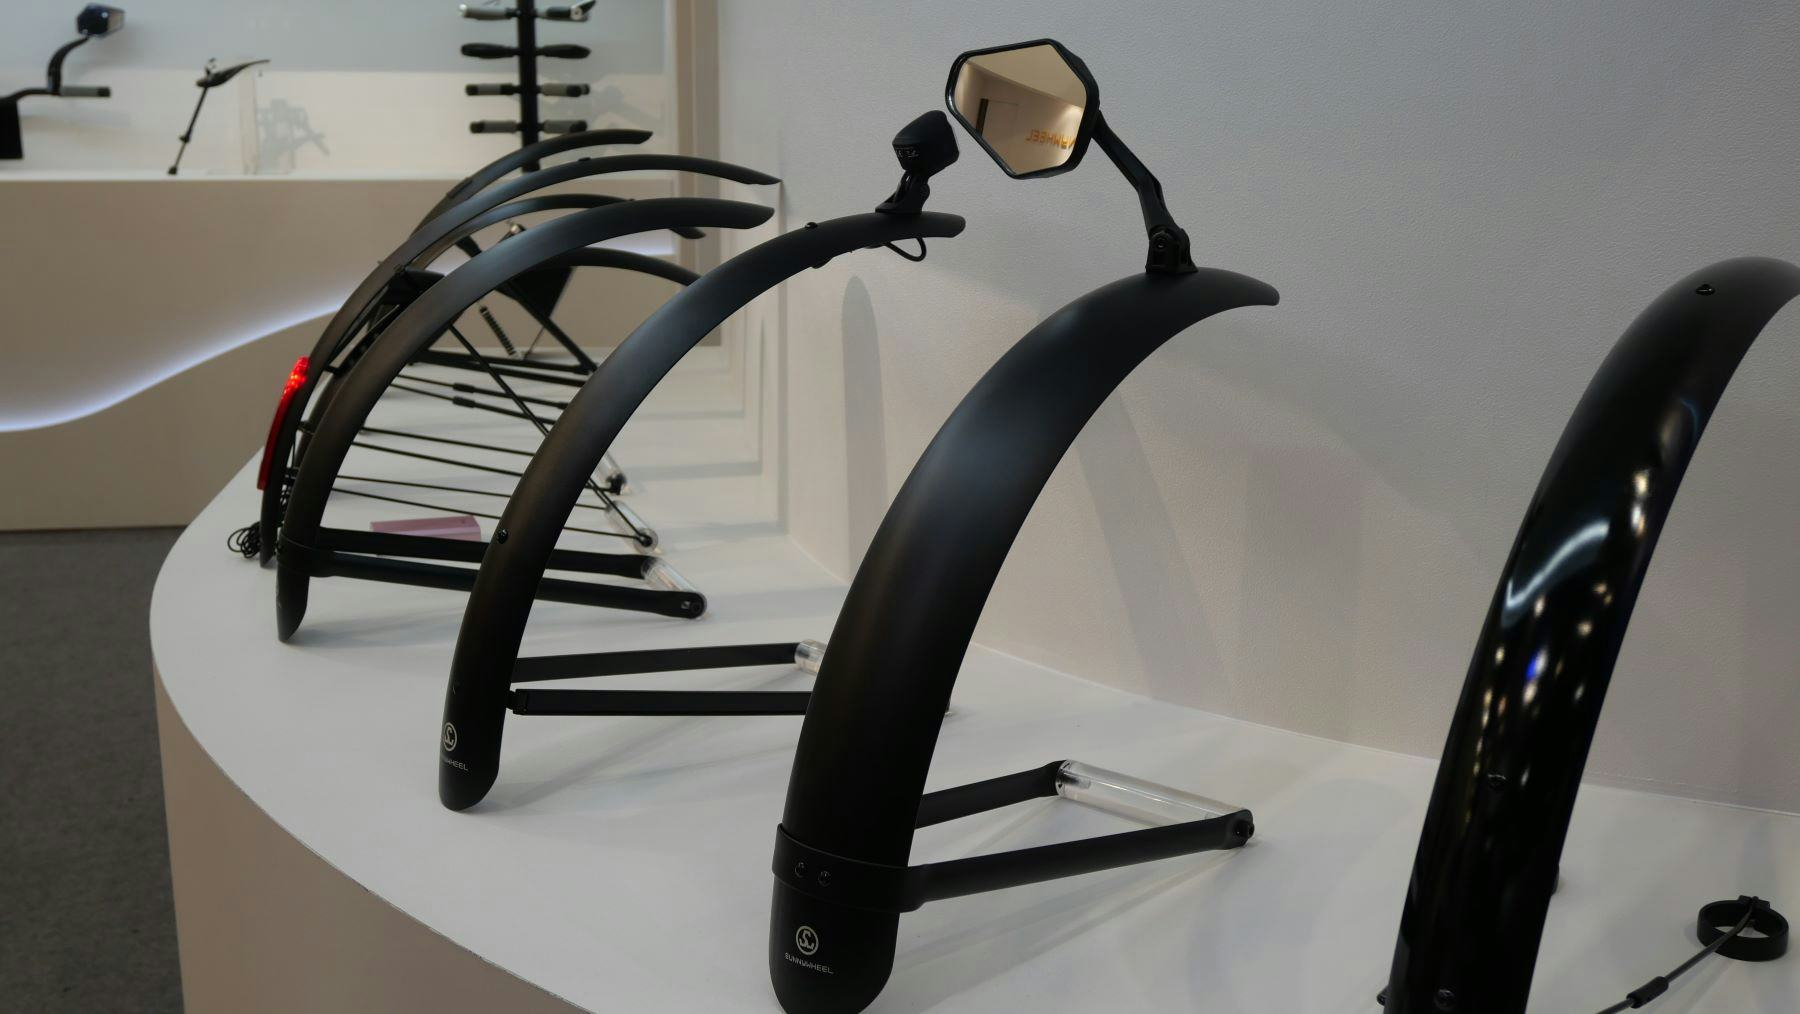 On display at Taipei Cycle show this year, Sunny Wheel has developed a mirror for cargobike fenders. – Photo Bike Europe